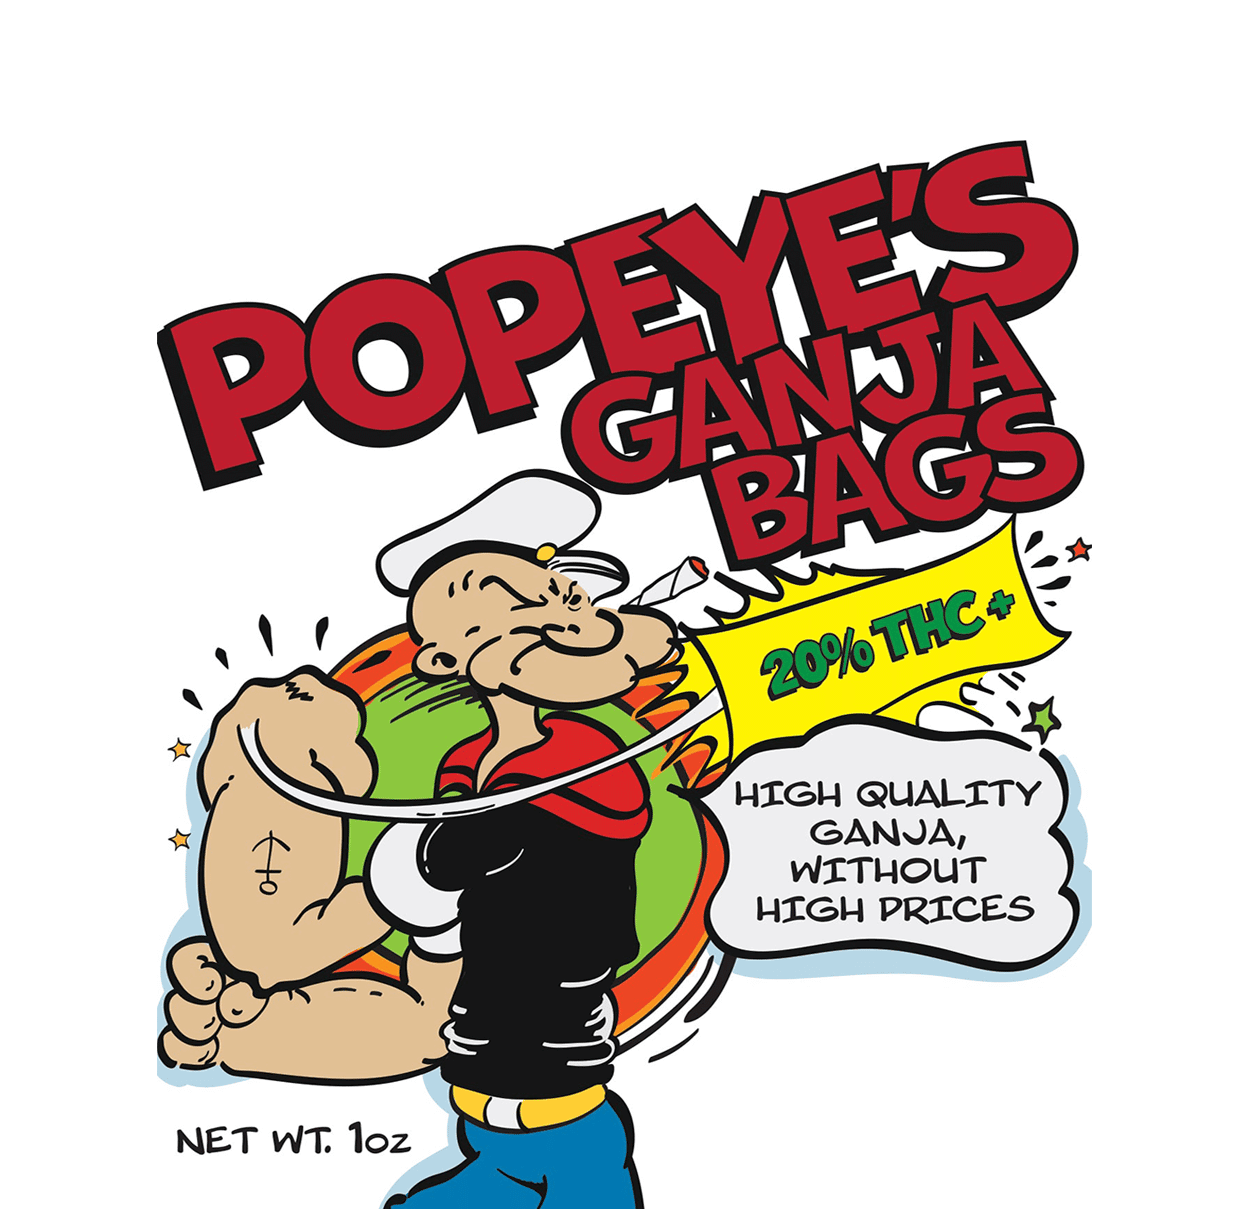 Popeye's Ganja Bags - Mix and Match - Ounces Image